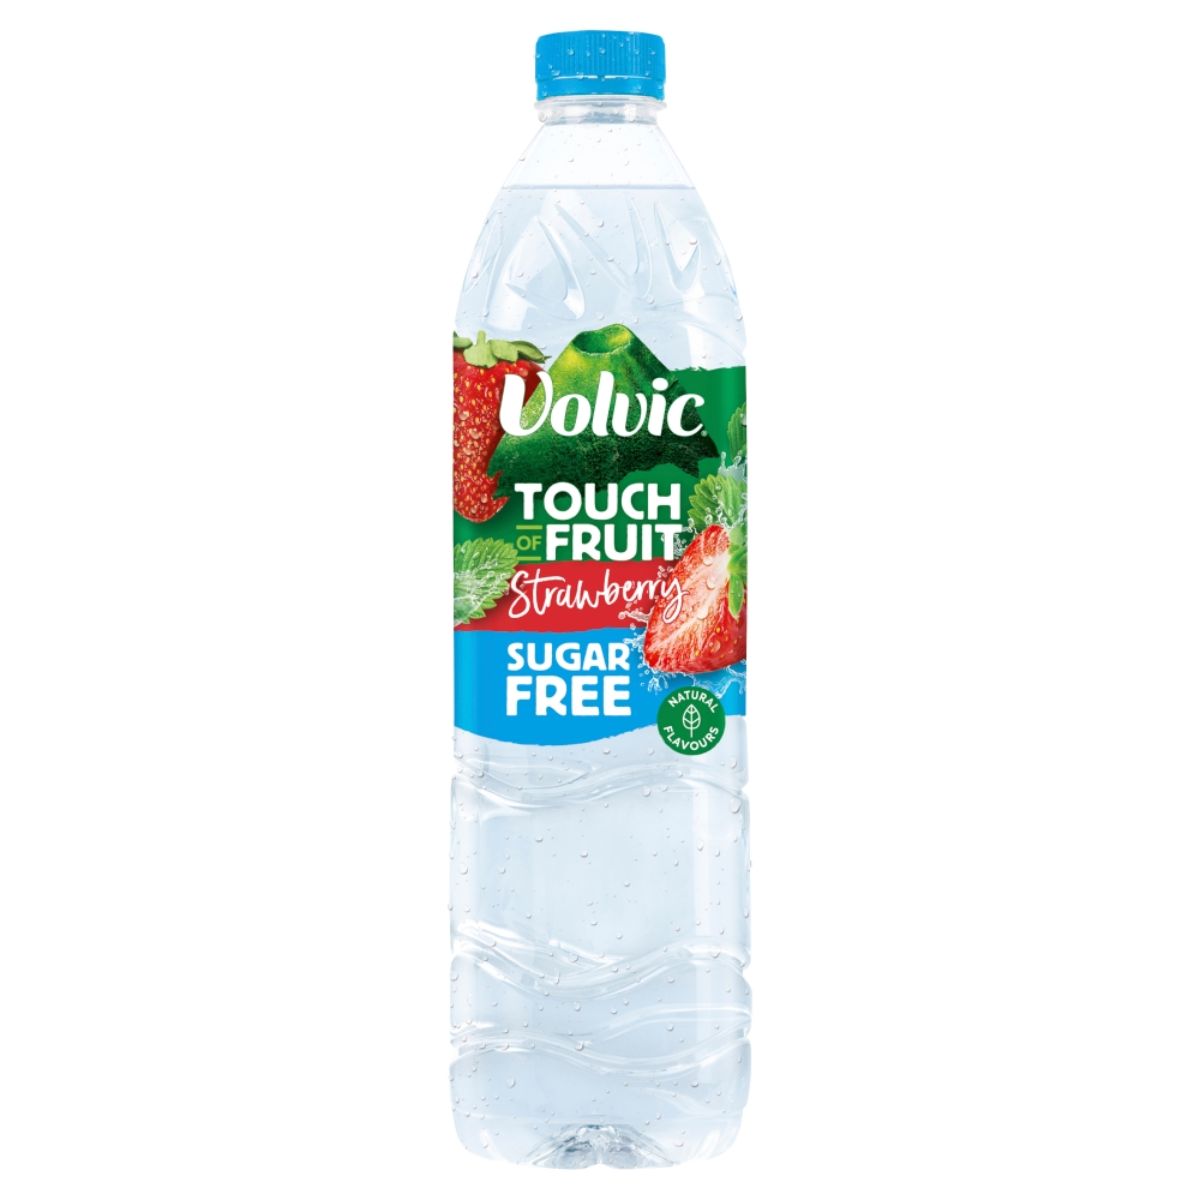 A bottle of Volvic Touch of Fruit Strawberry Sugar Free - 1.5L water on a white background.